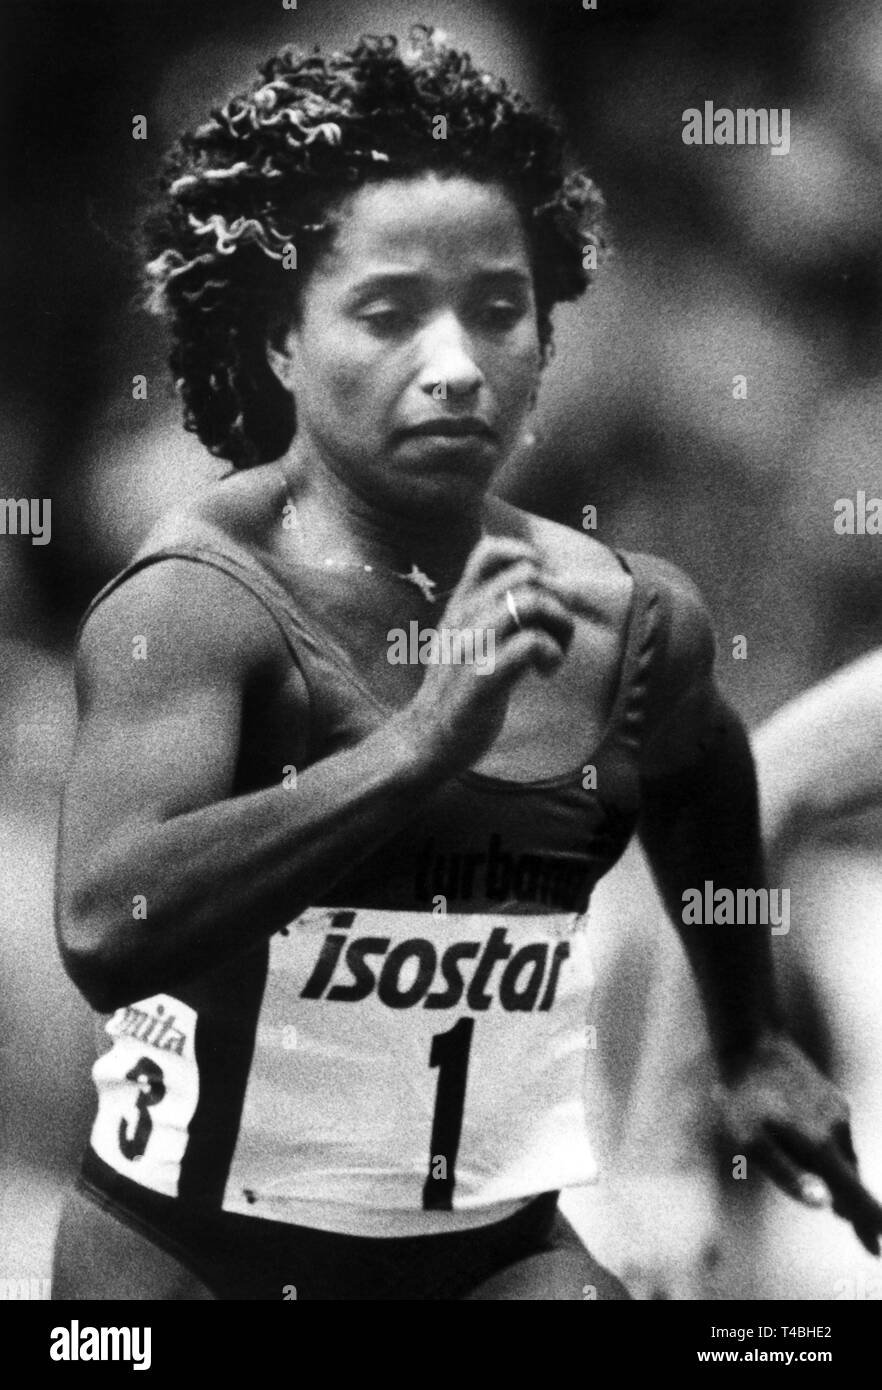 The Netherlander Nelly Cooman won the 2nd place in 60m at the hall-athletics sports festival on 21st February 1990. | usage worldwide Stock Photo